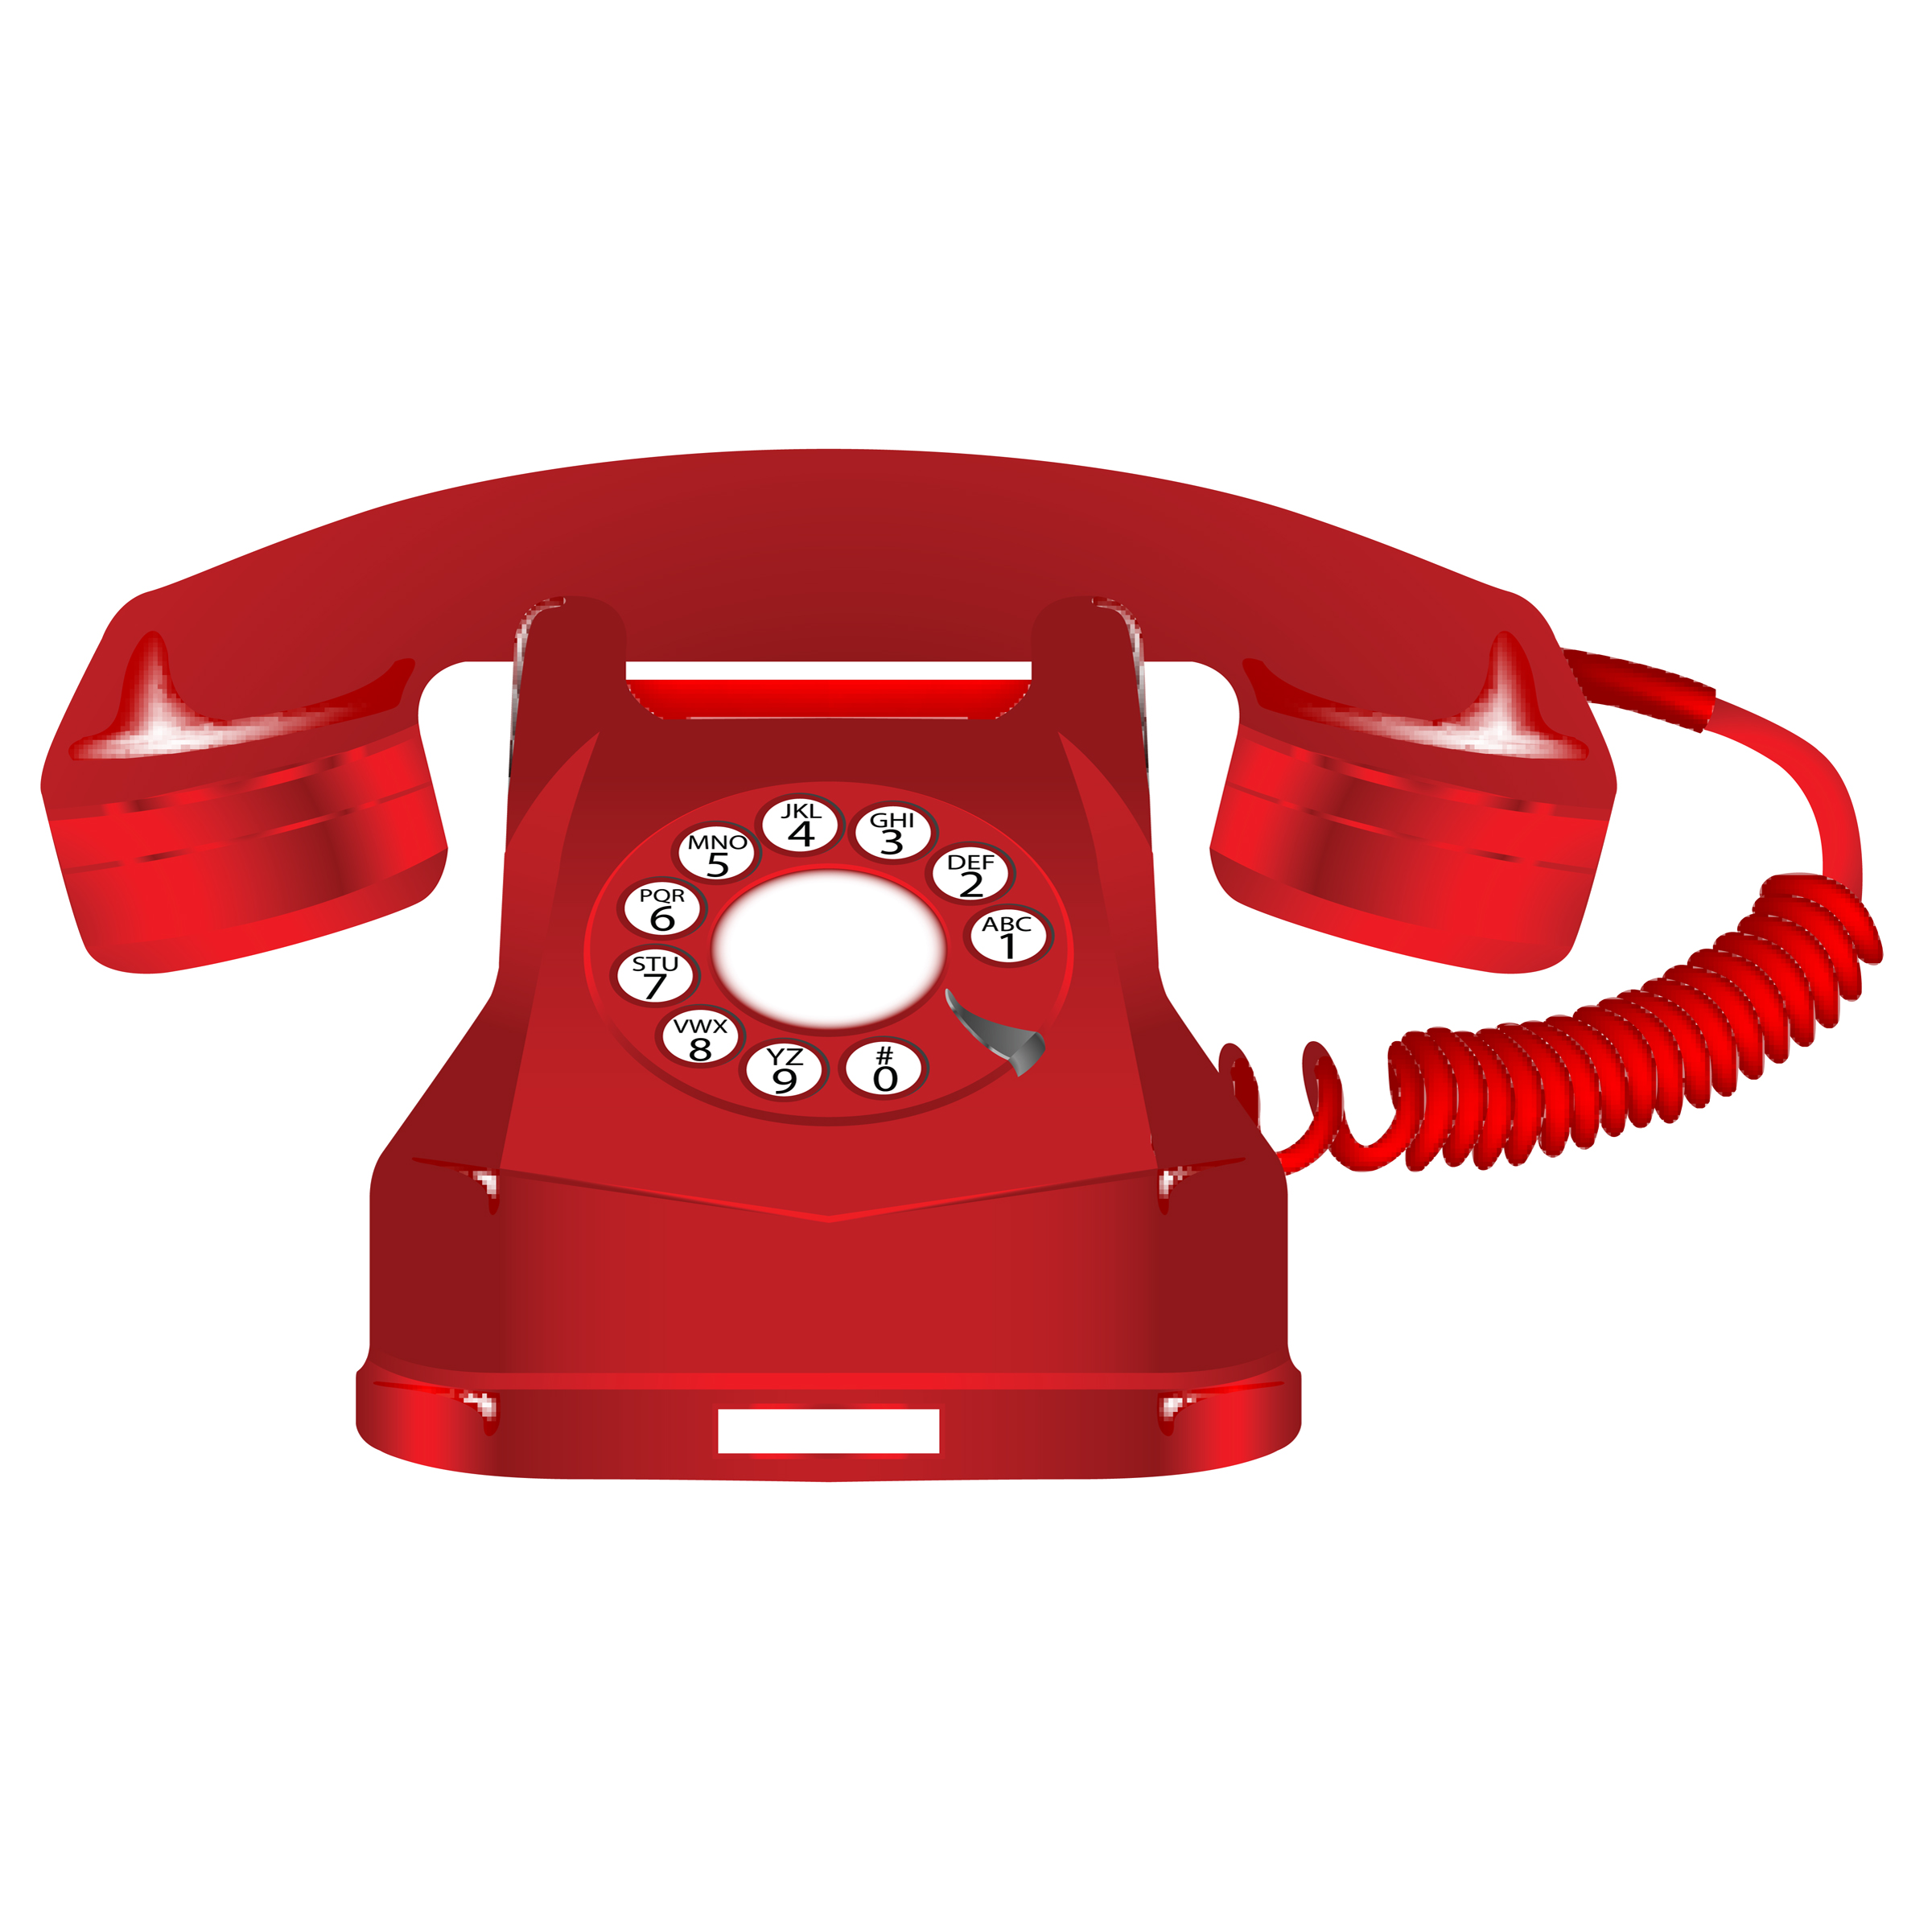 There Is 51 Business Telephone Ringing   Free Cliparts All Used For